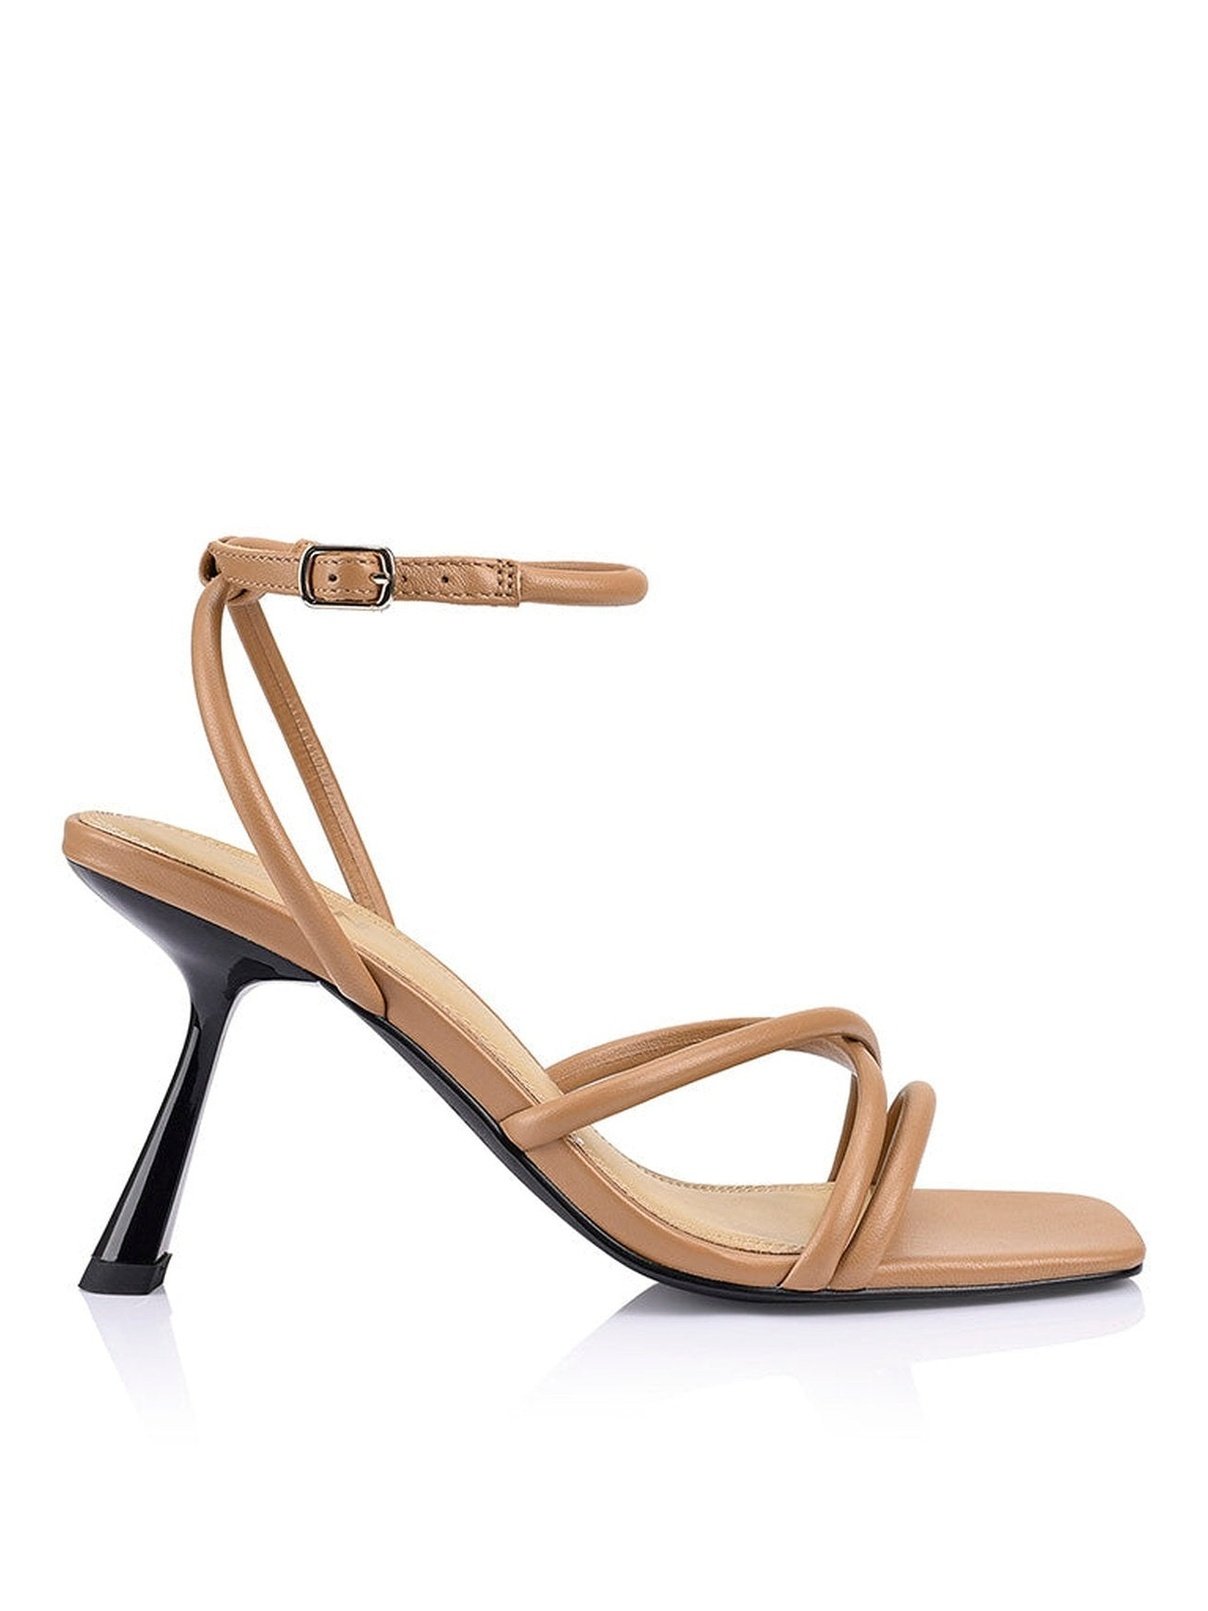 Spruce Heeled Sandals - Soft Tan Leather – Siren Shoes